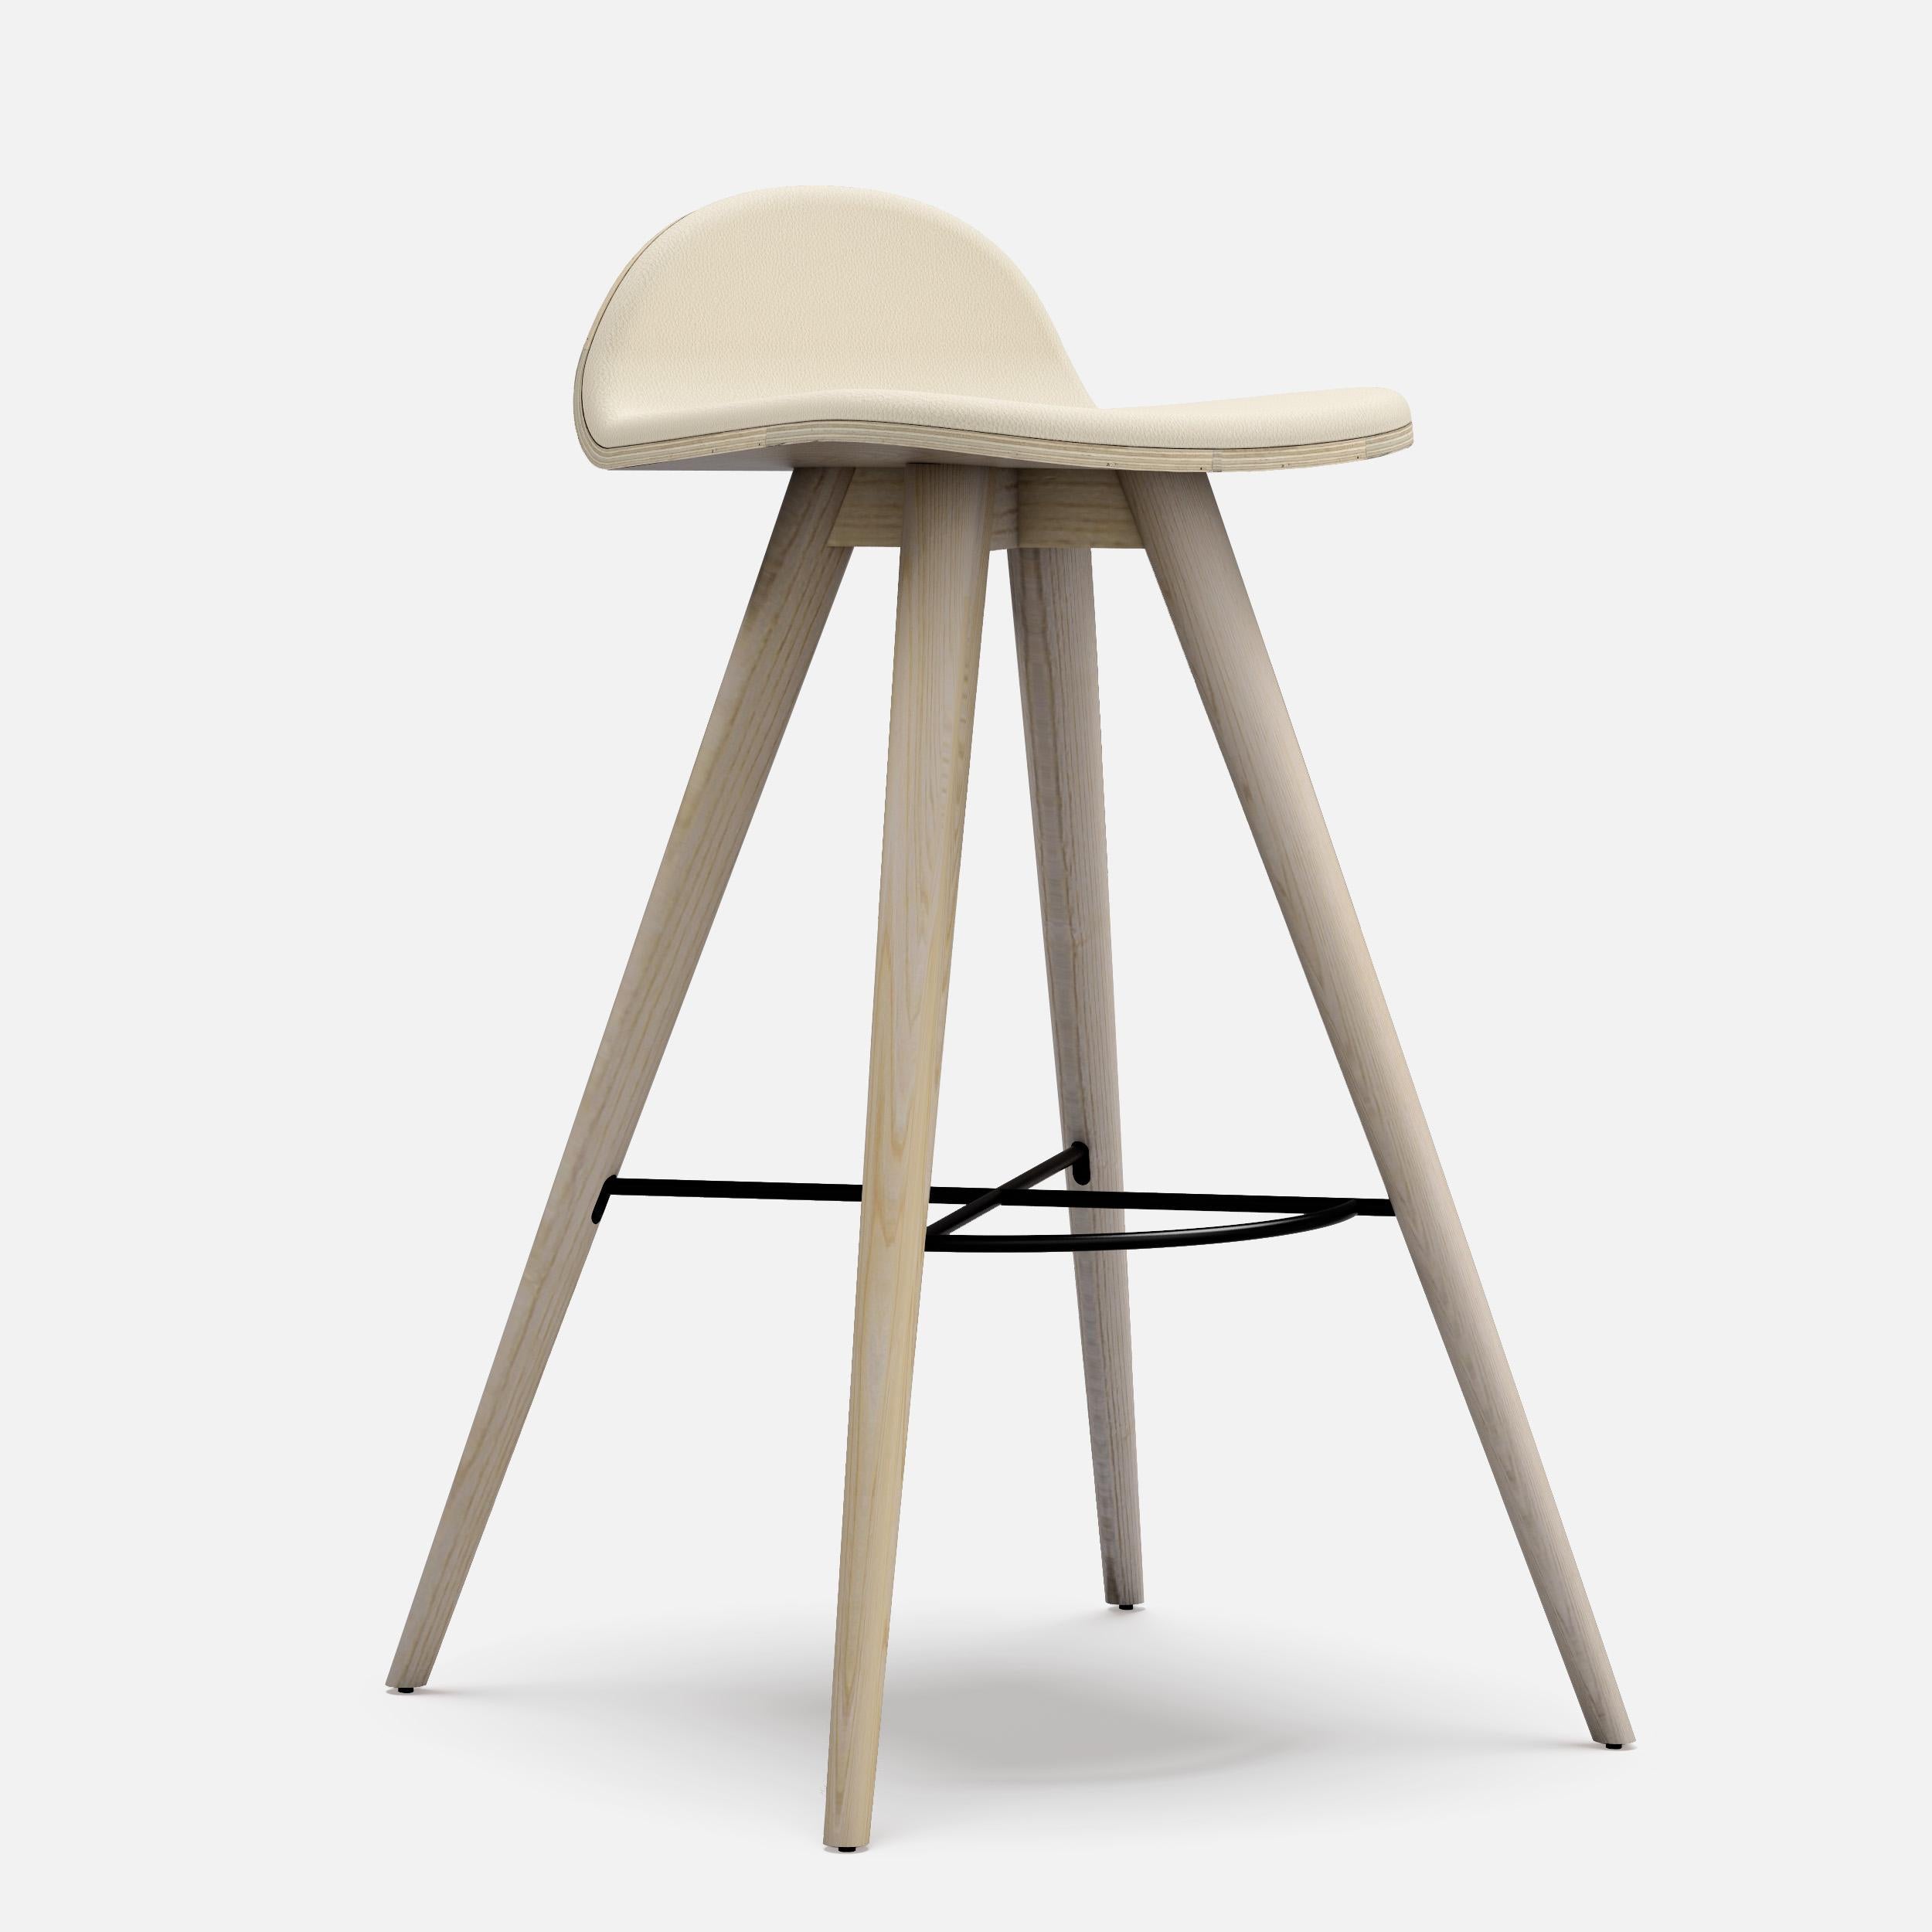 Ash and fabric contemporary counter stool.
Dimensions: W 49 x D 46 x H 79 cm
Materials: Ash and fabric

Structure also available in beech, ash, oak and mix wood
Seat also available in fabric, leather and corkfabric.


 